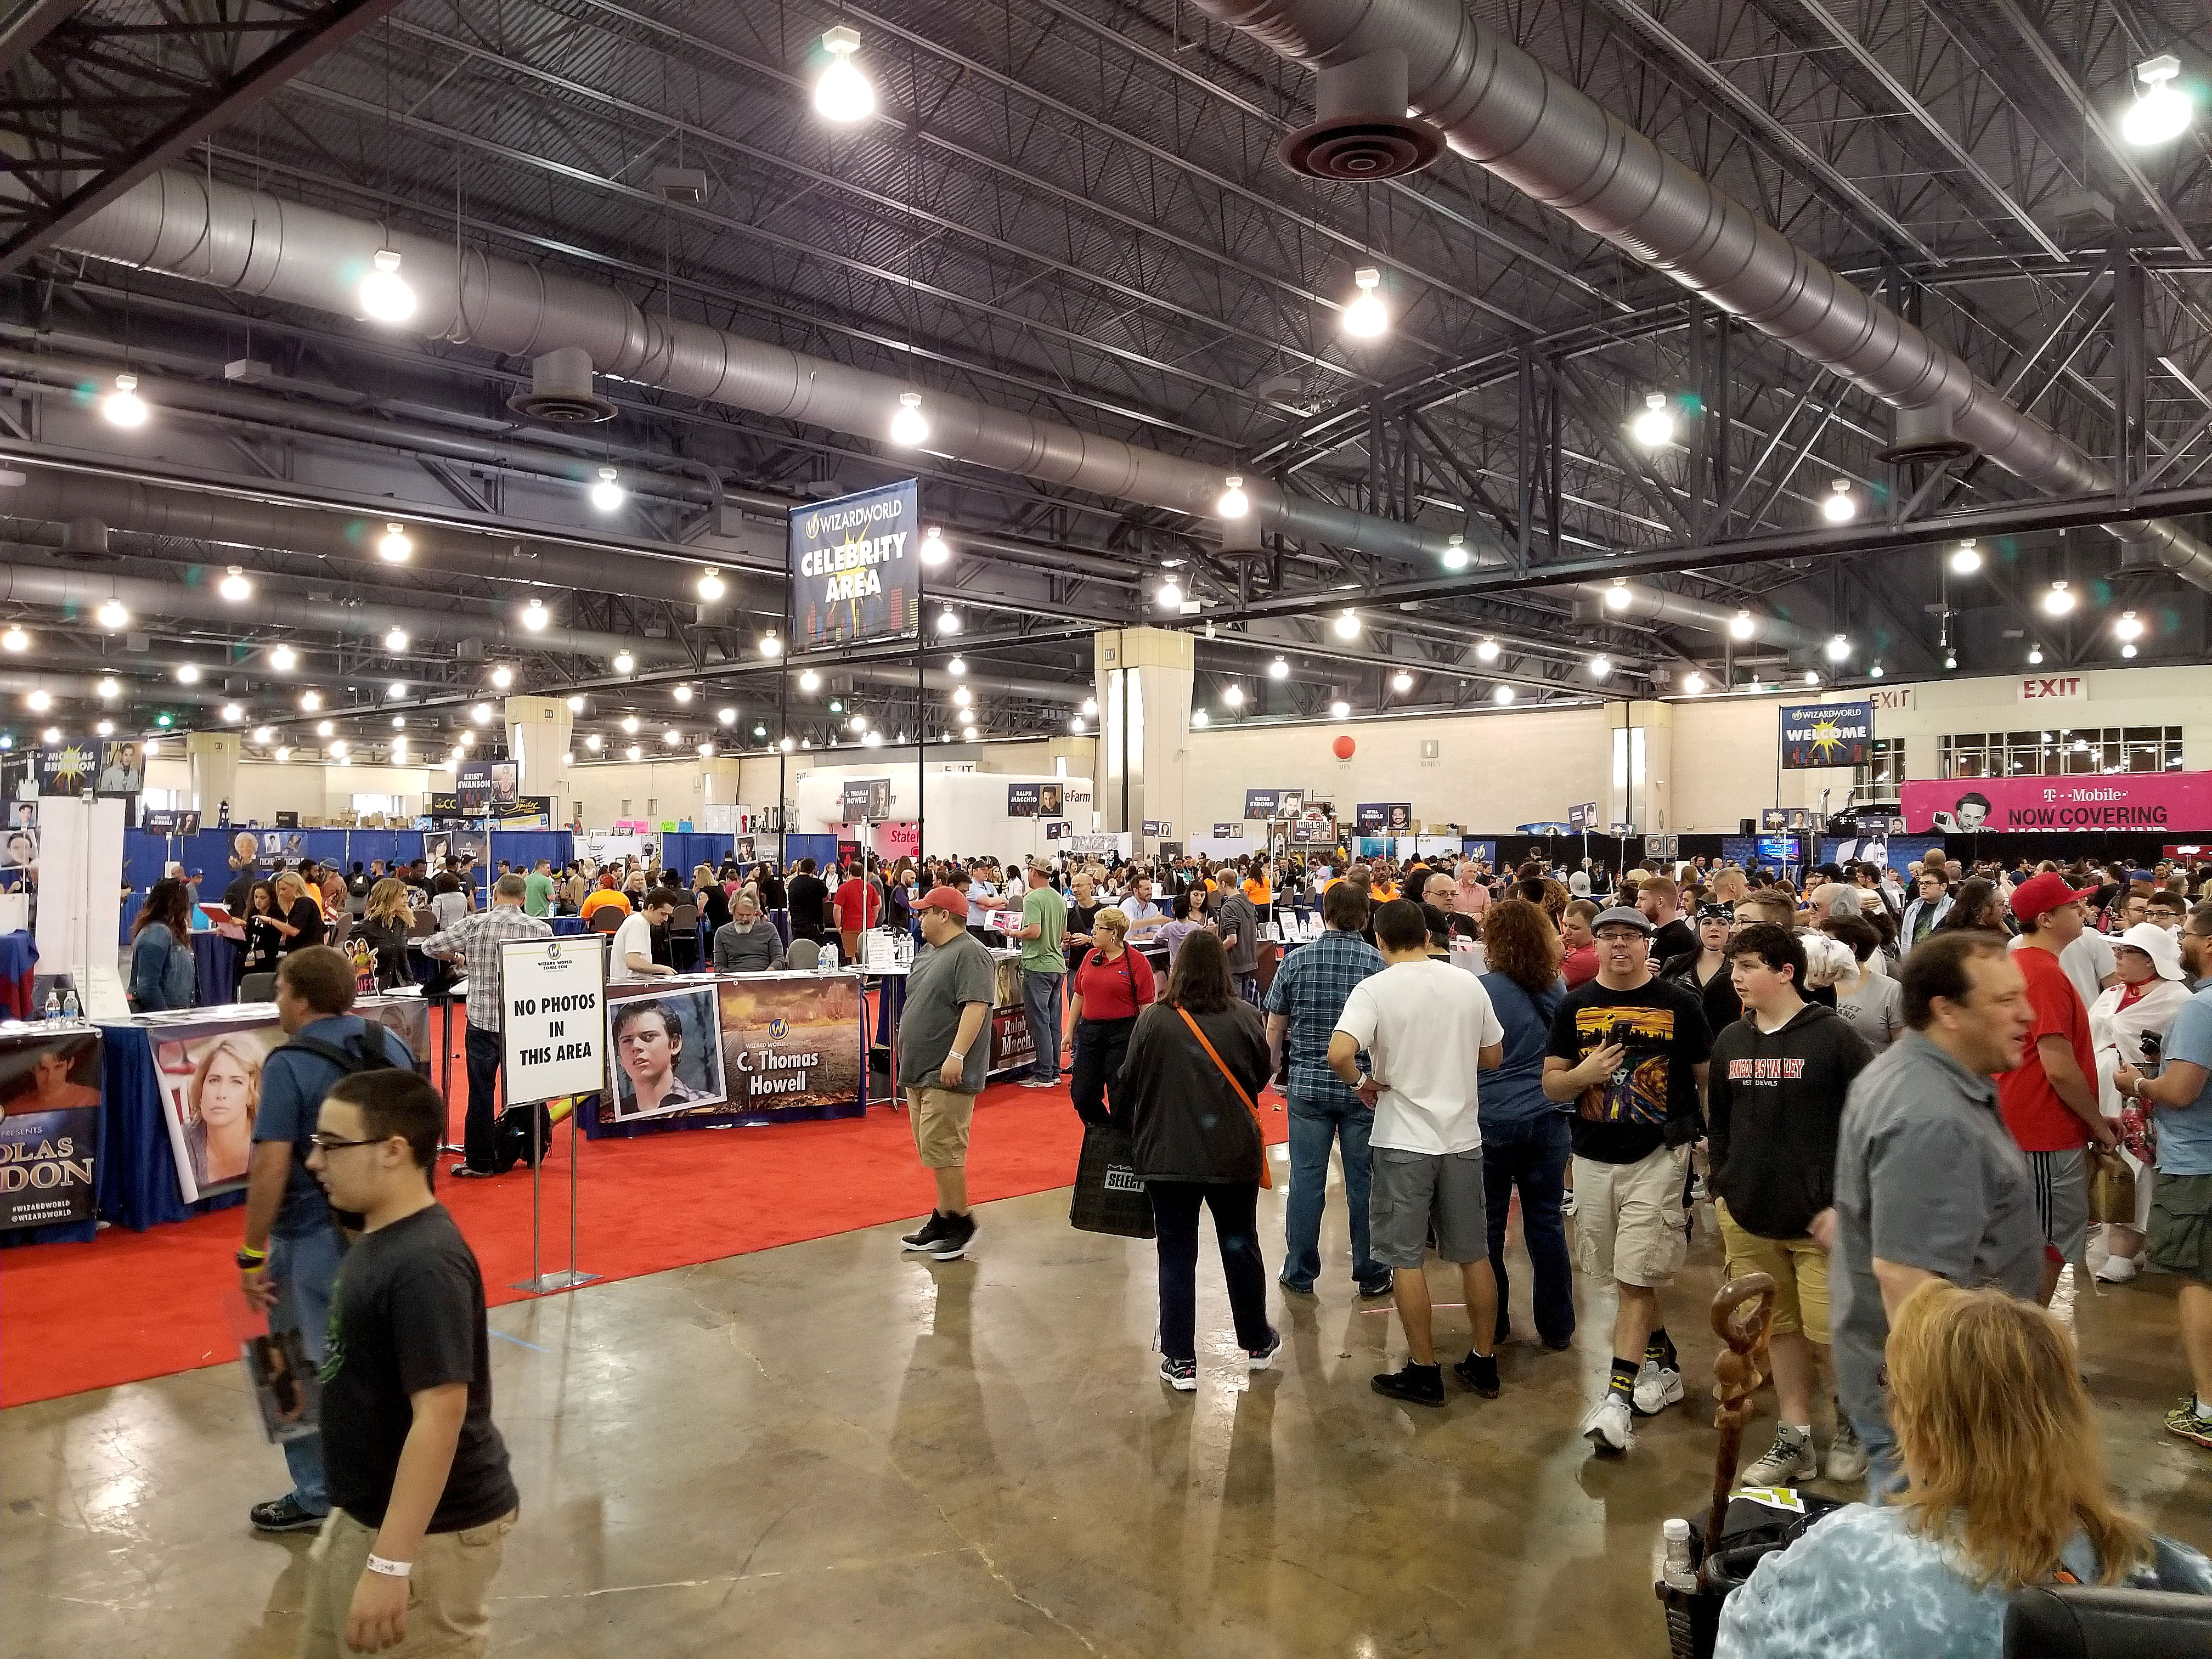 Many comic book and movie fans converge at the Pennsylvania Convention Center. Photo: Peter Fitzpatrick/AL DIA News